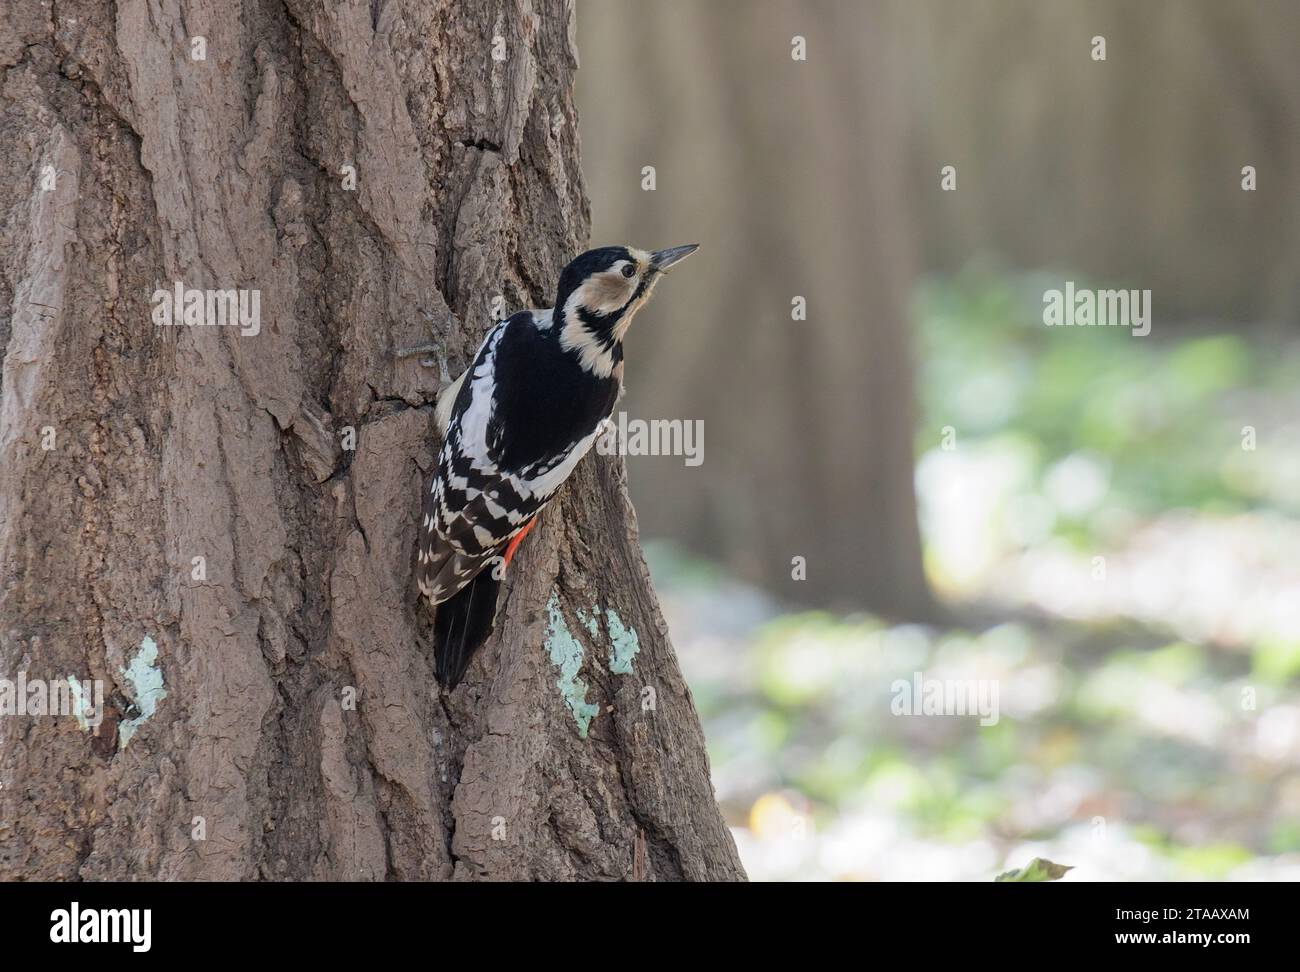 Great Spotted Woodpecker bird at Beijing China Stock Photo